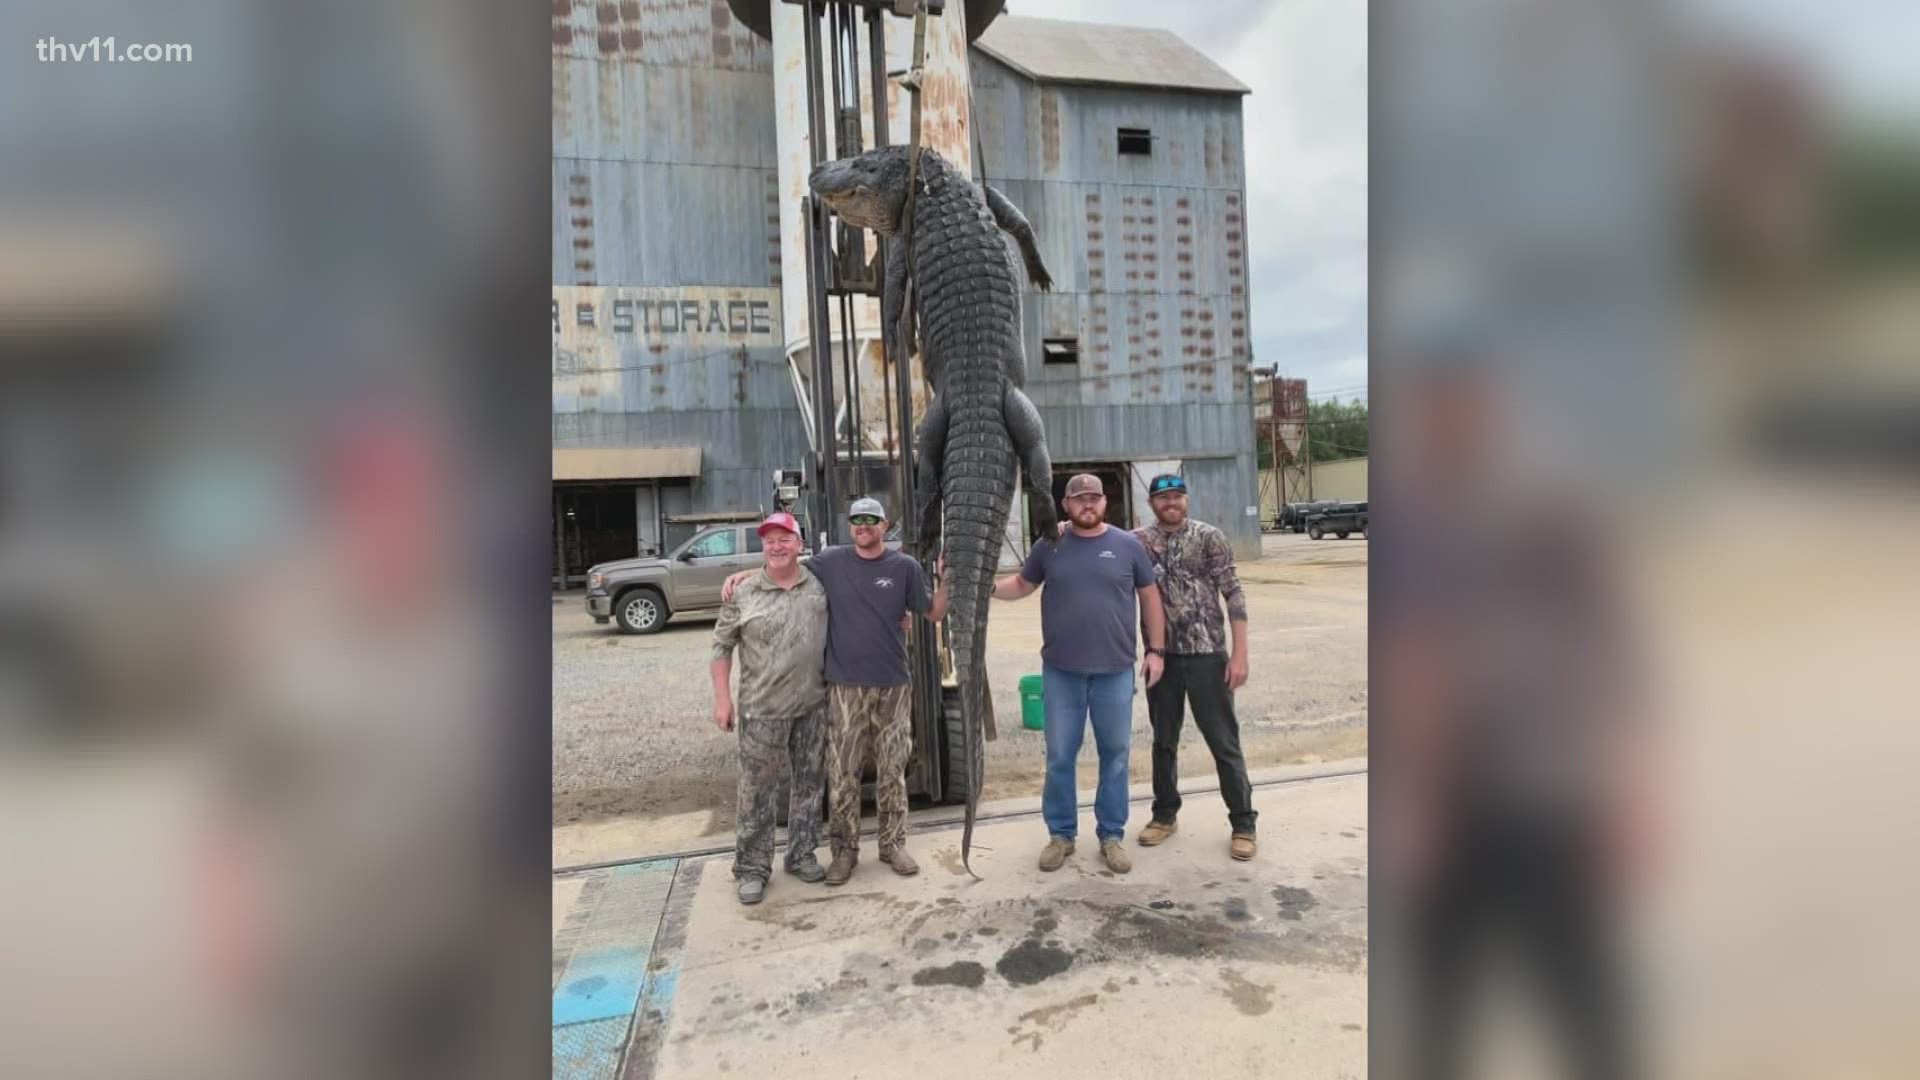 Four men have set a record for the biggest gator catch in Arkansas.